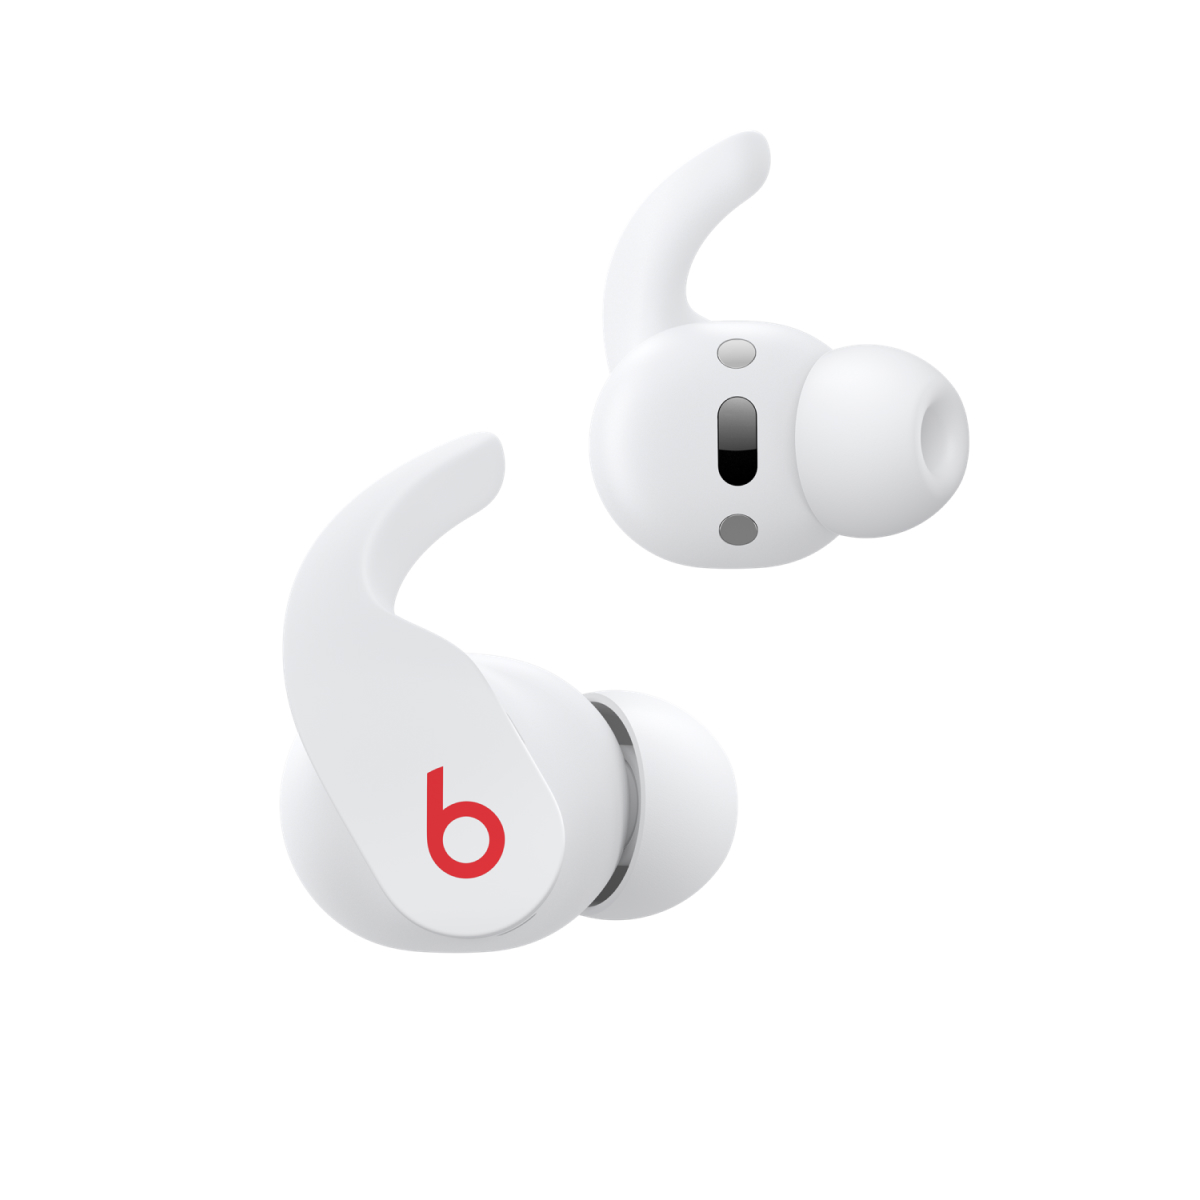 A pair of Beats Fit Pro earbuds in White